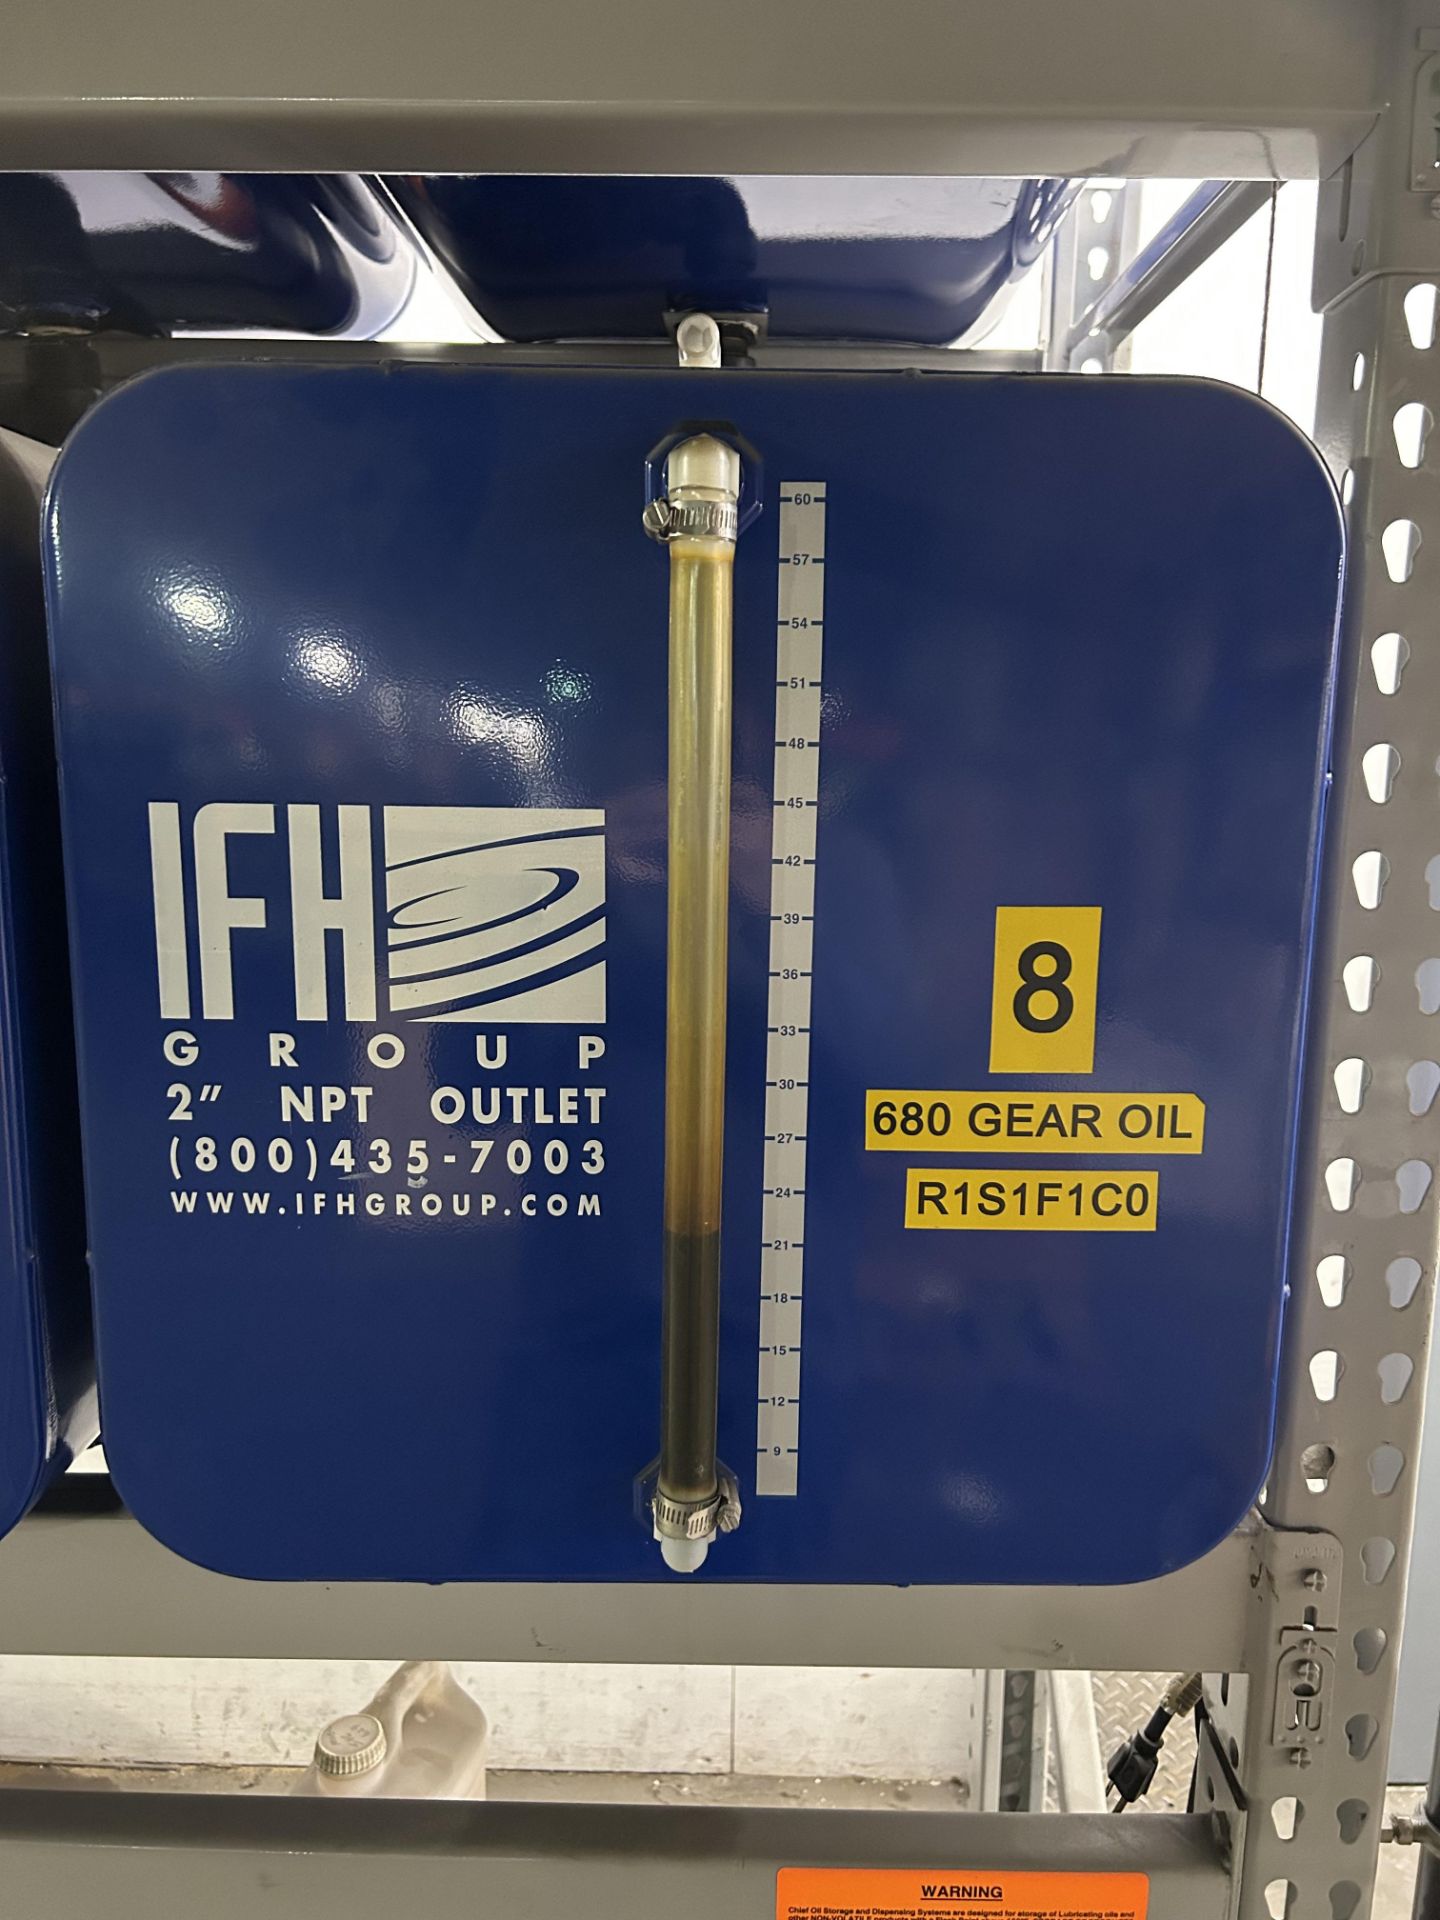 IFH Oil Filtration Station, Rigging & Loading Fee: $650 - Image 5 of 5